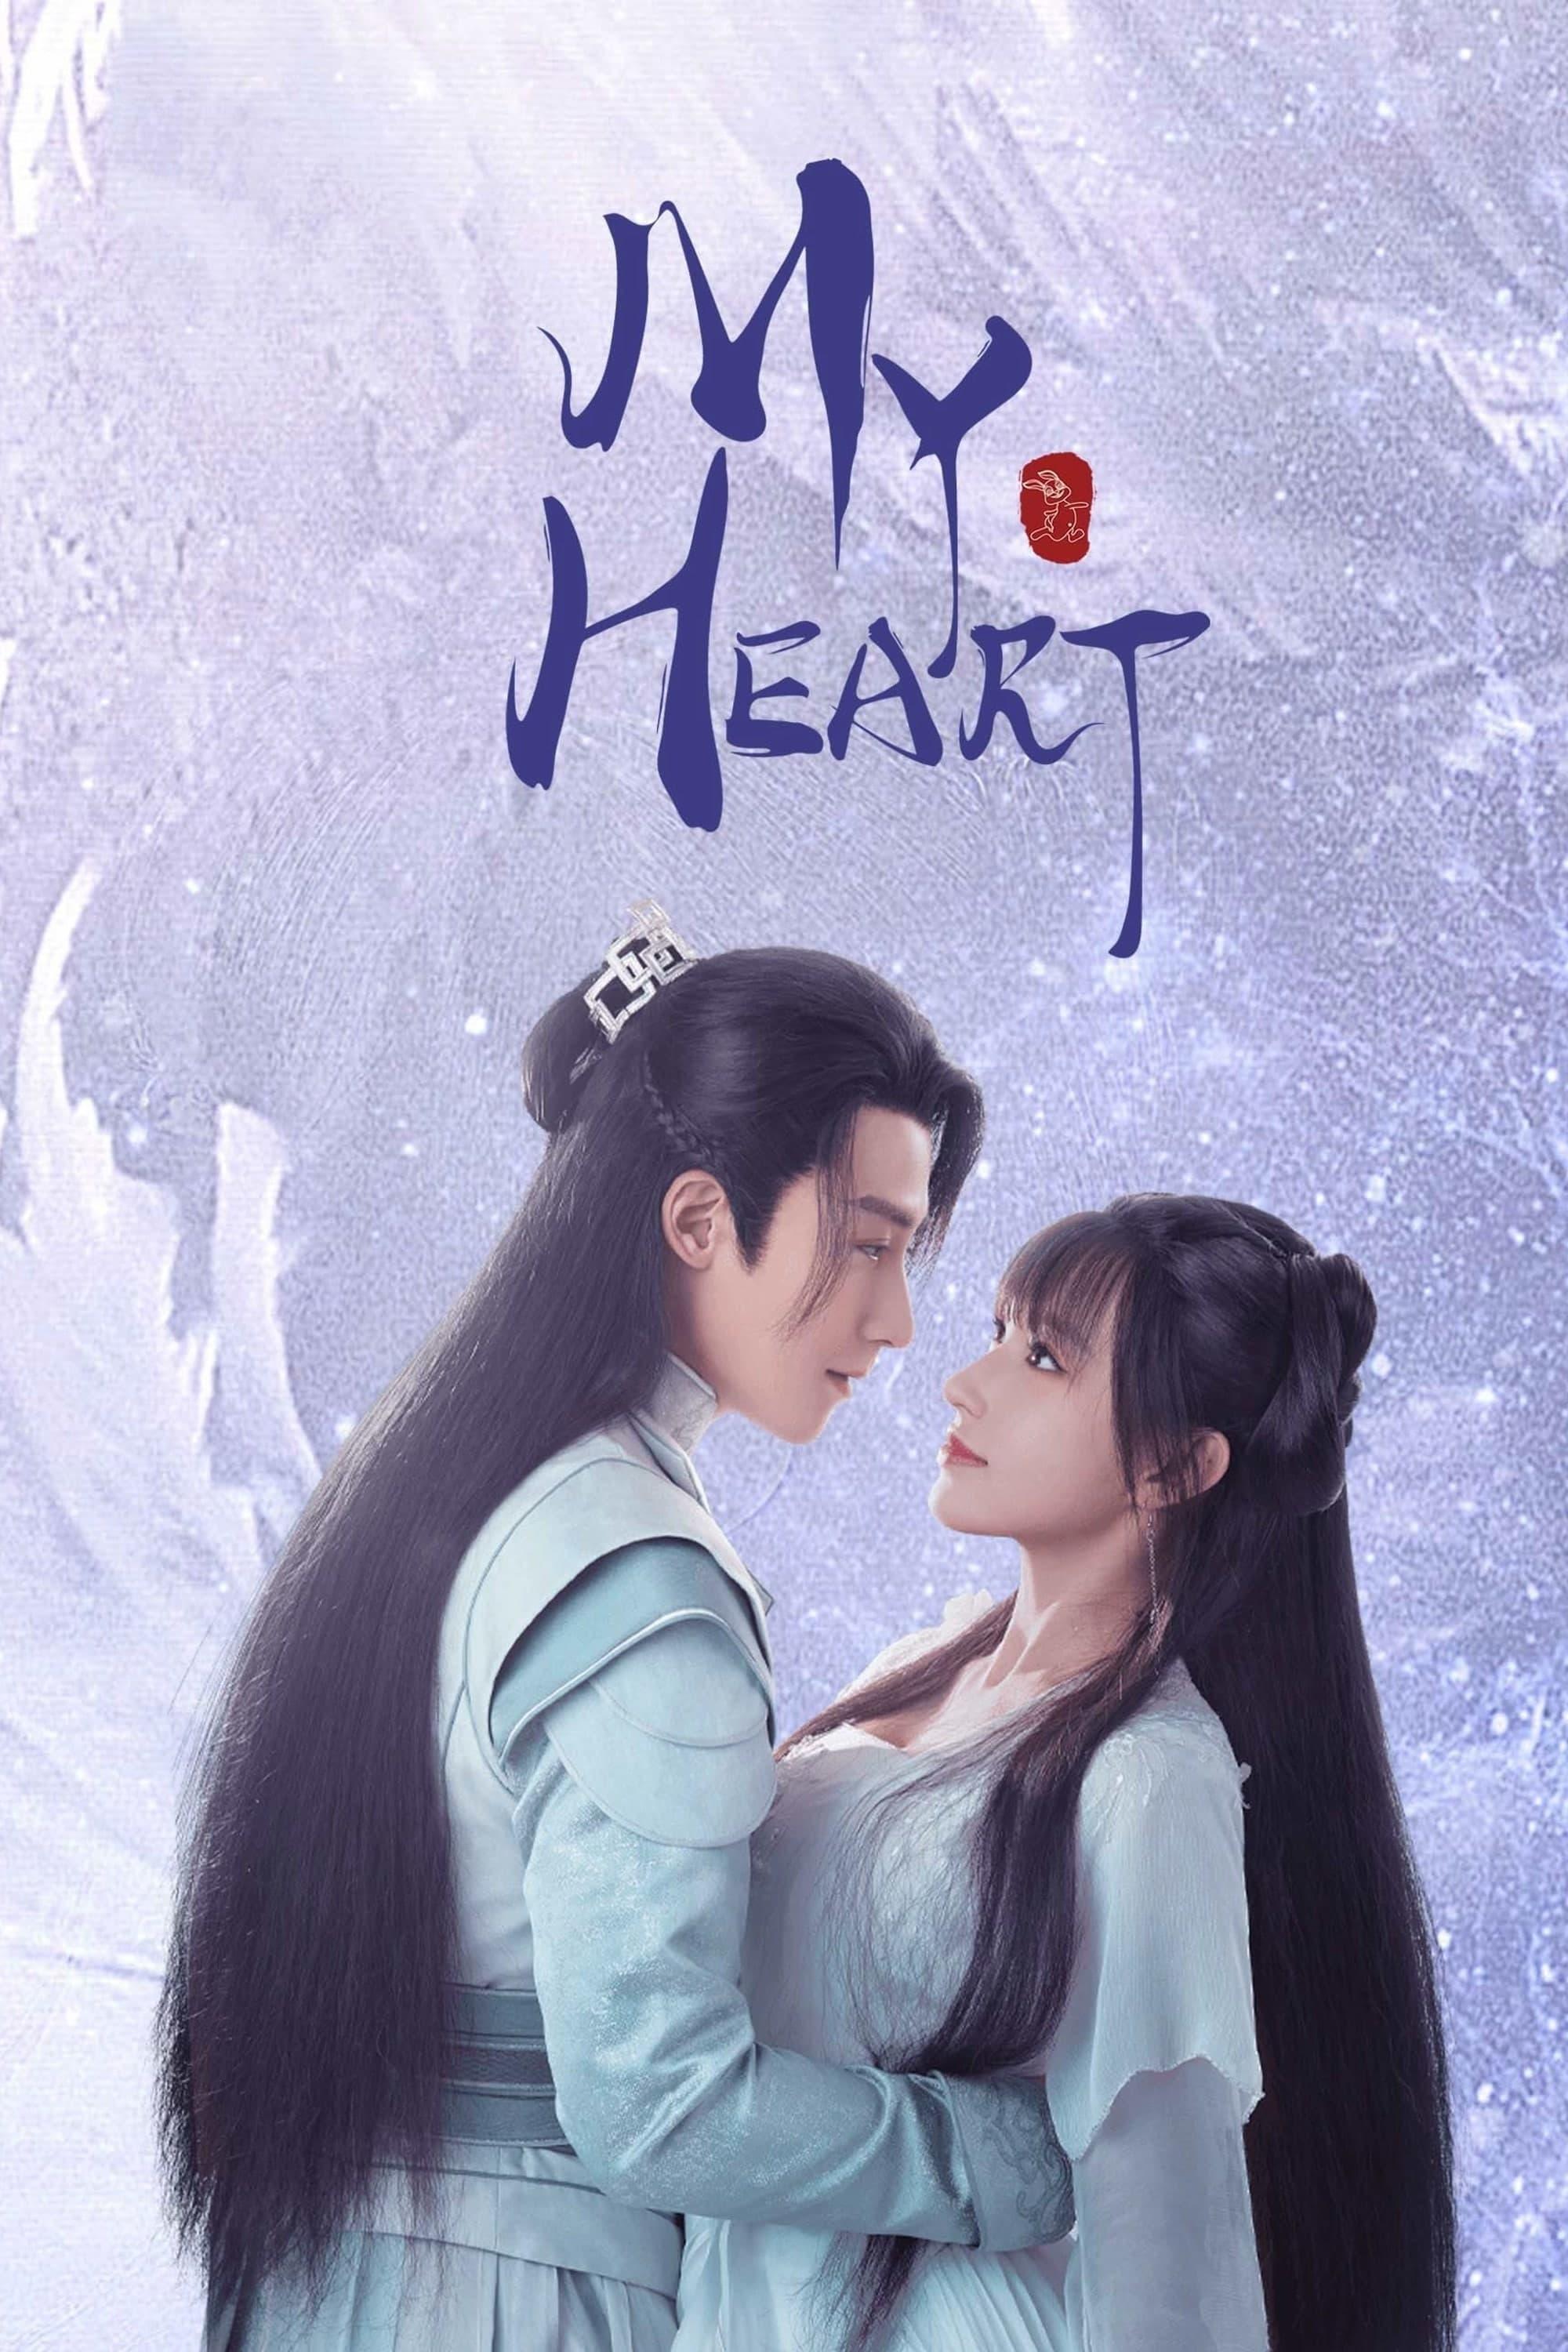 My Heart poster